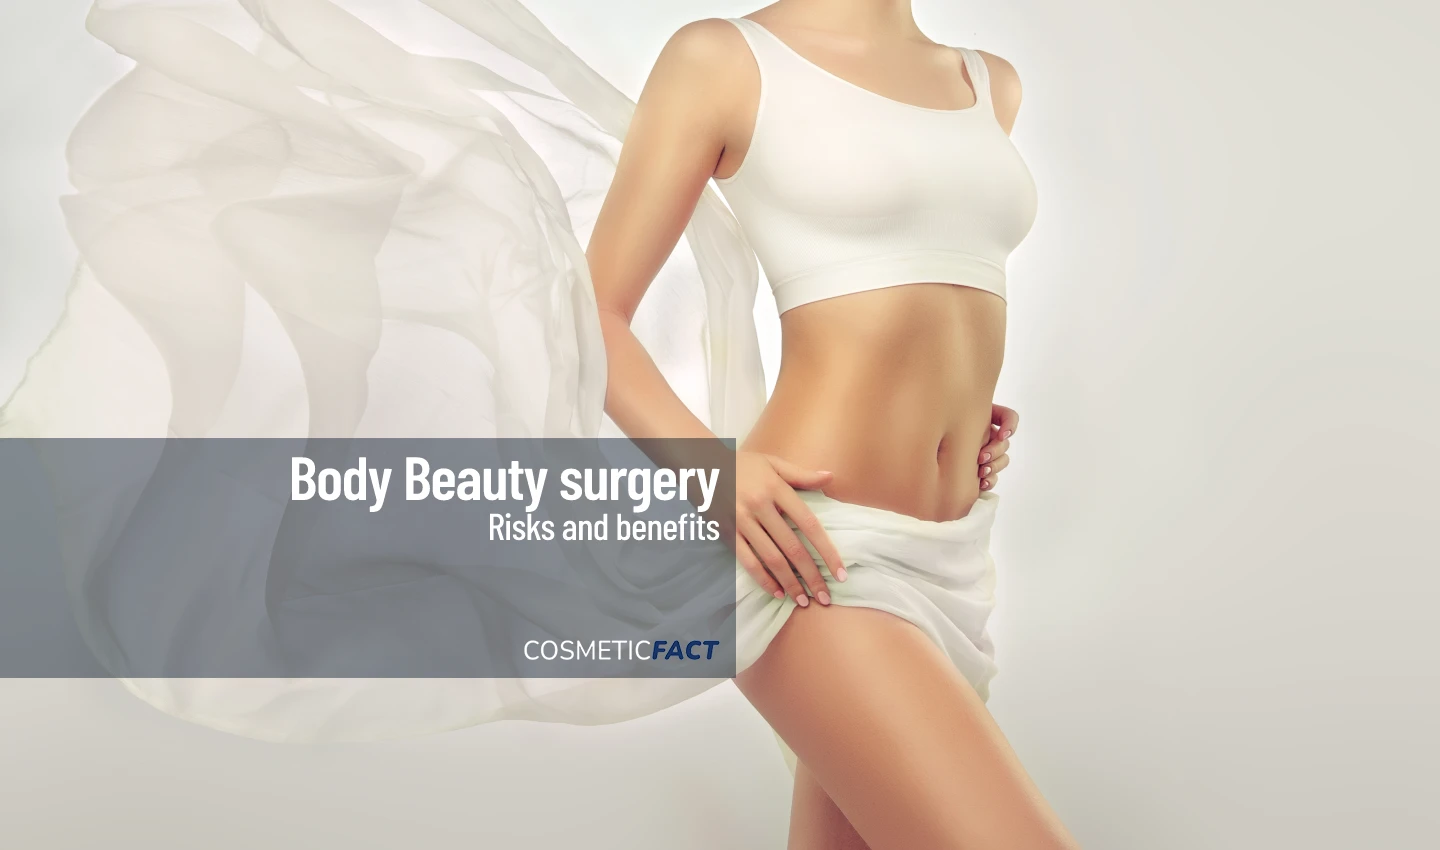 A photo of a woman with a beautiful body, representing the importance of safe body cosmetic surgery.